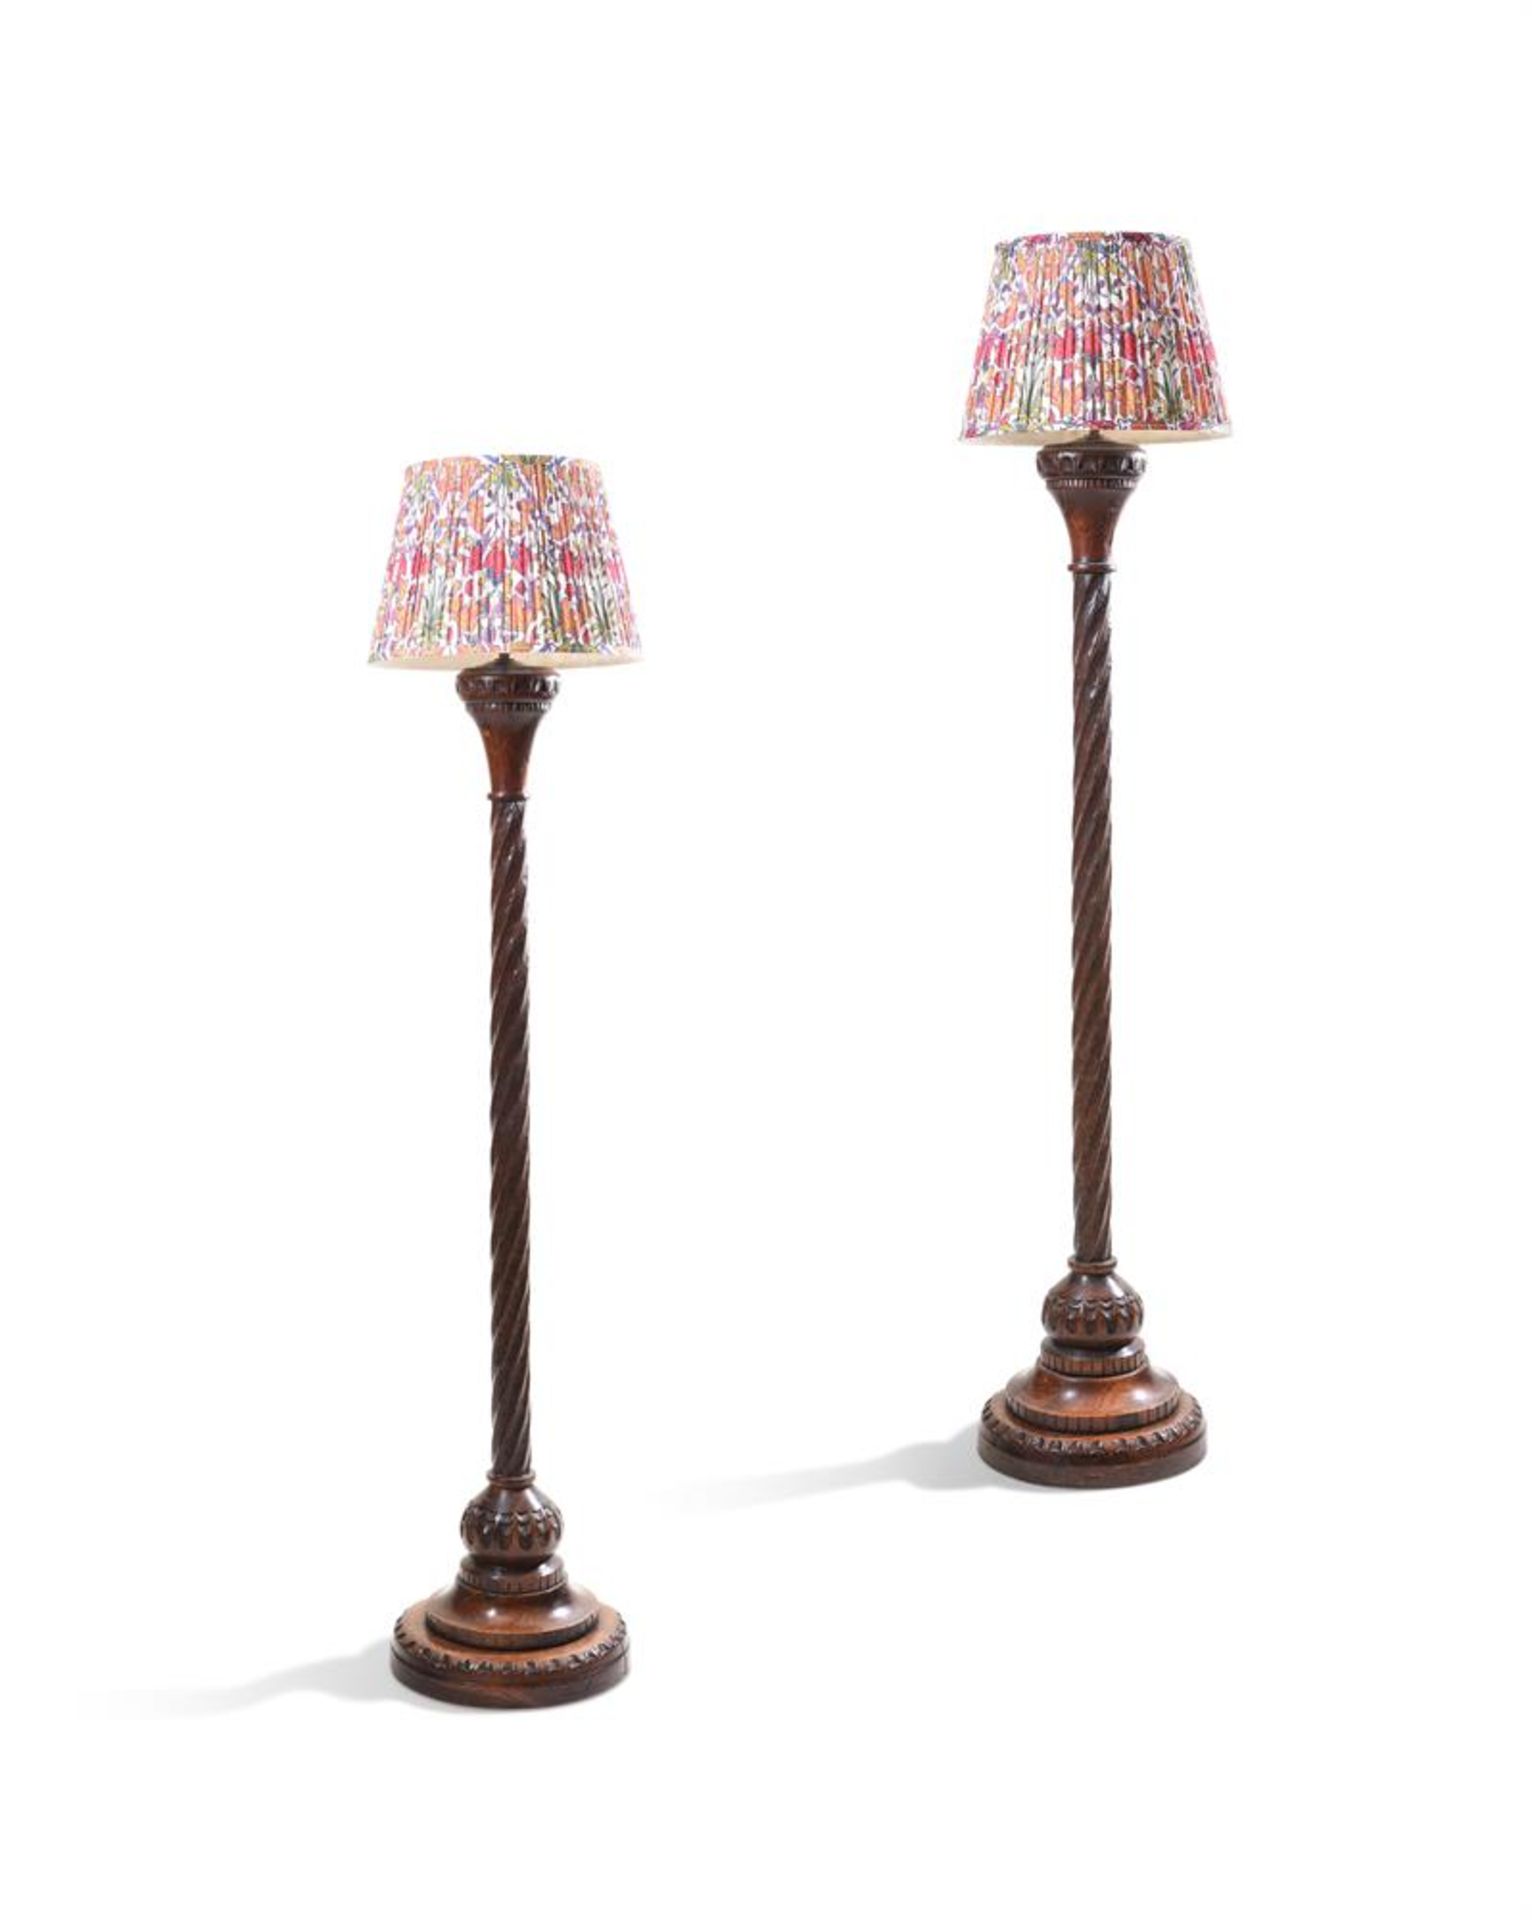 A PAIR OF CARVED OAK STANDARD LAMPS, LATE 19TH OR EARLY 20TH CENTURY